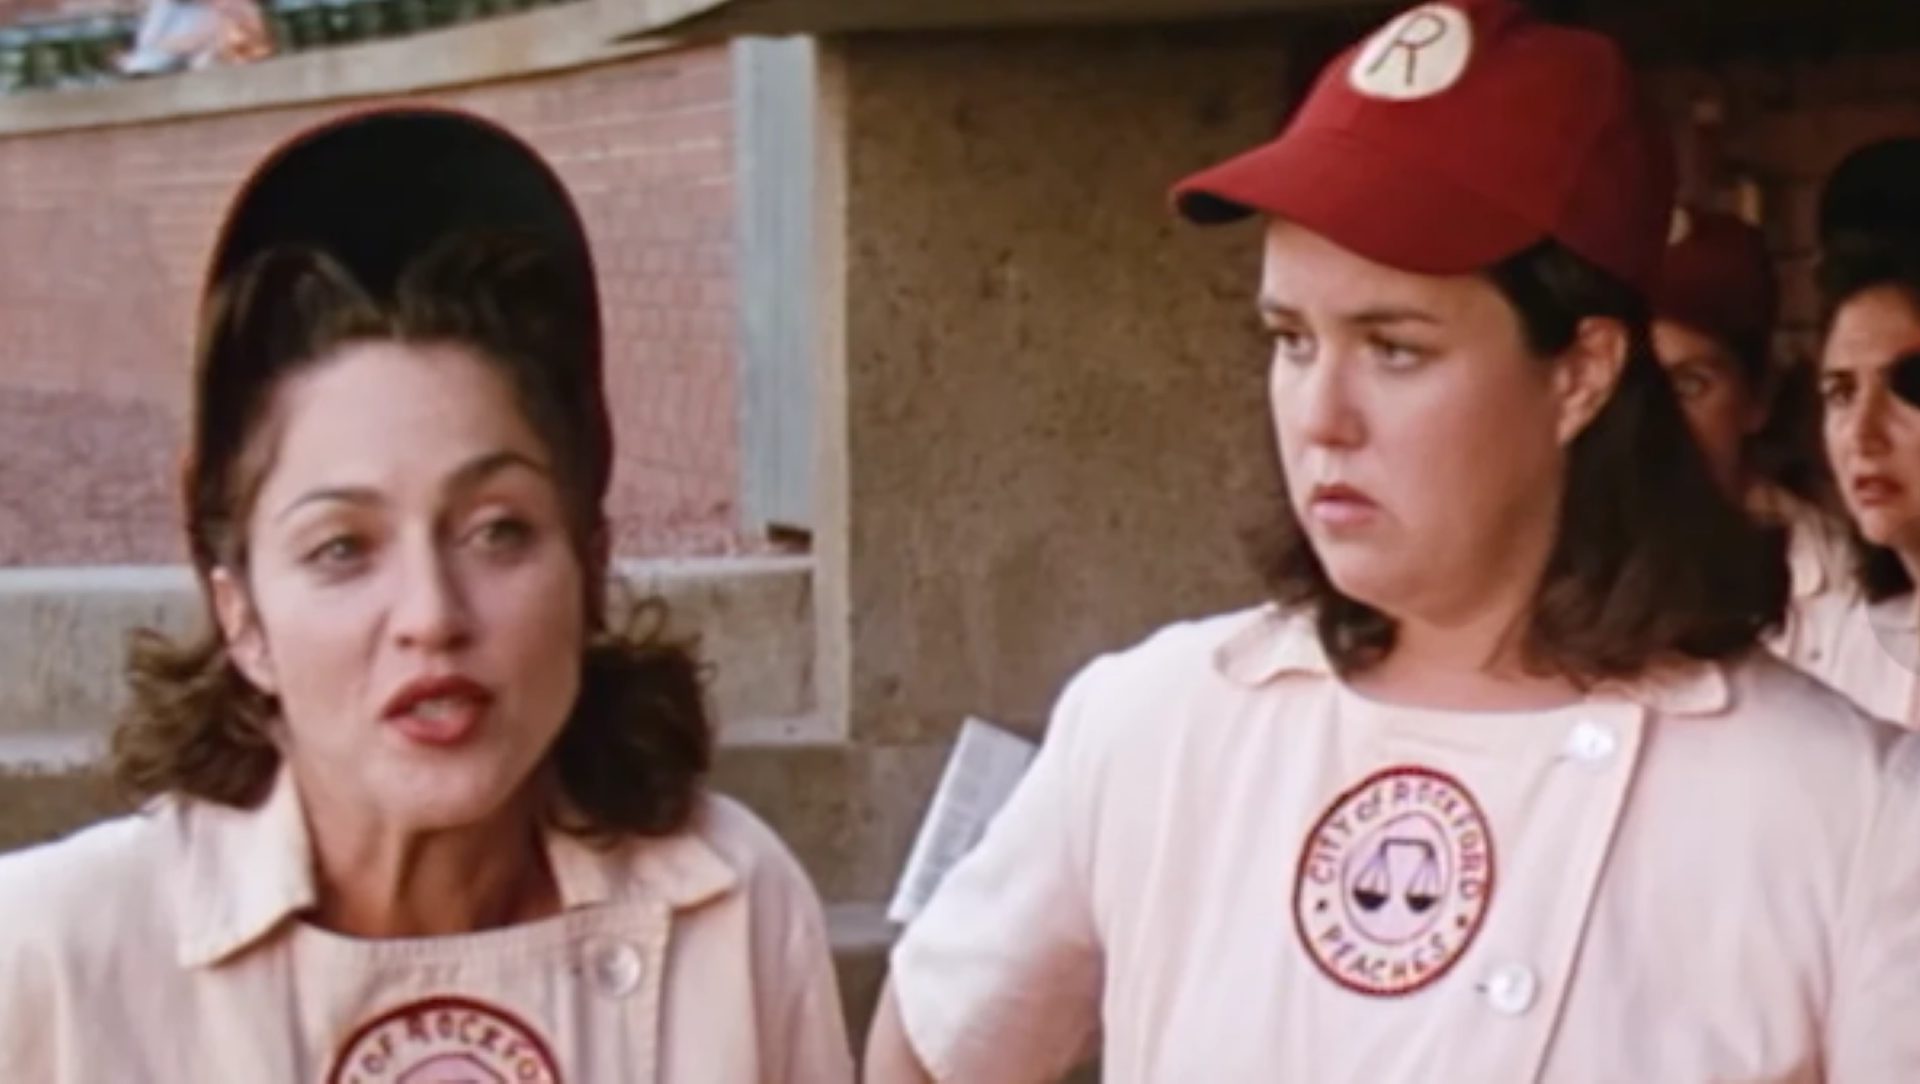 A league of her own